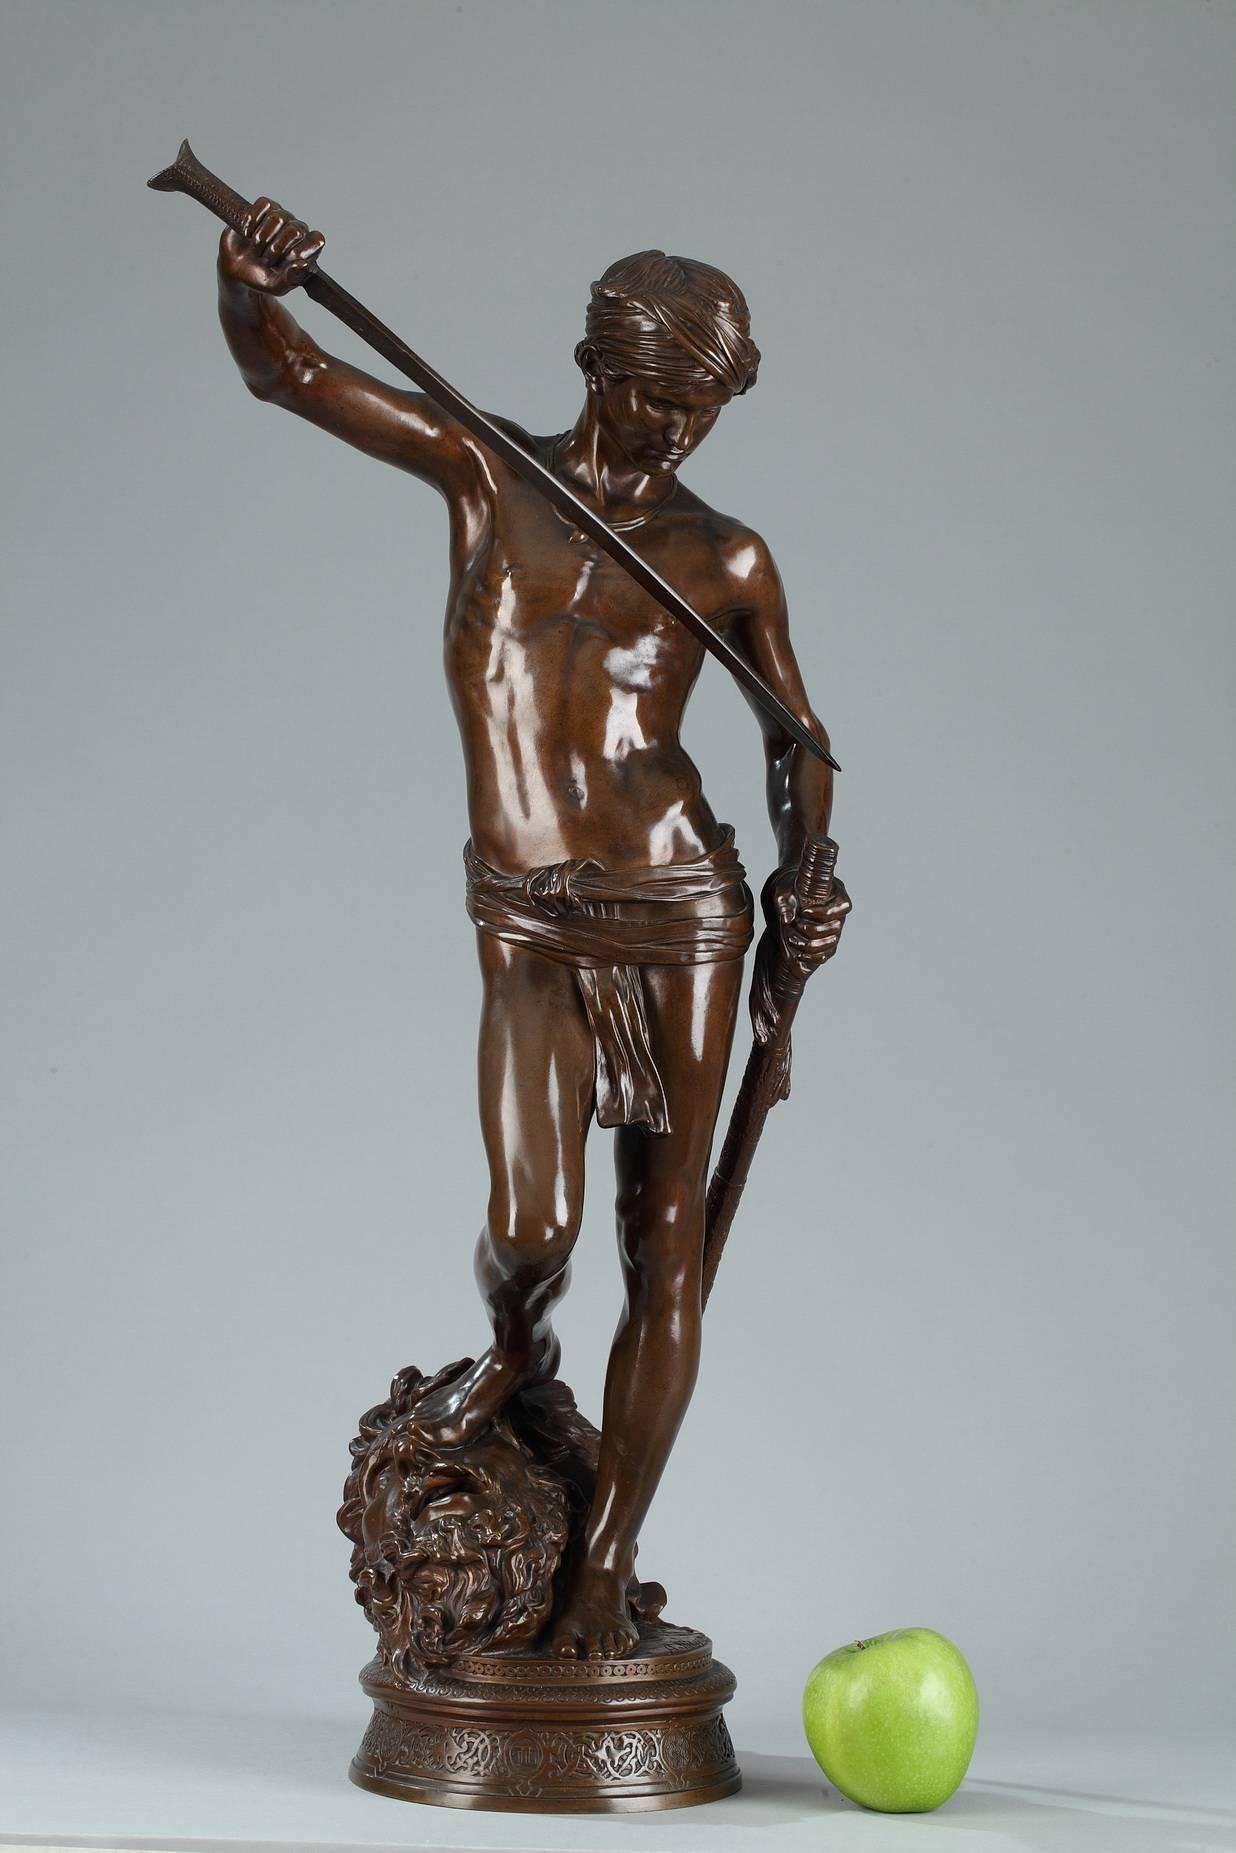 Bronze with brown patina featuring King David after conquering Goliath. The sculpture is set on a circular base and is embellished with geometric patterns and interlacing arabesques. Signed on the base: A. Mercié. Barbedienne foundry, mechanical